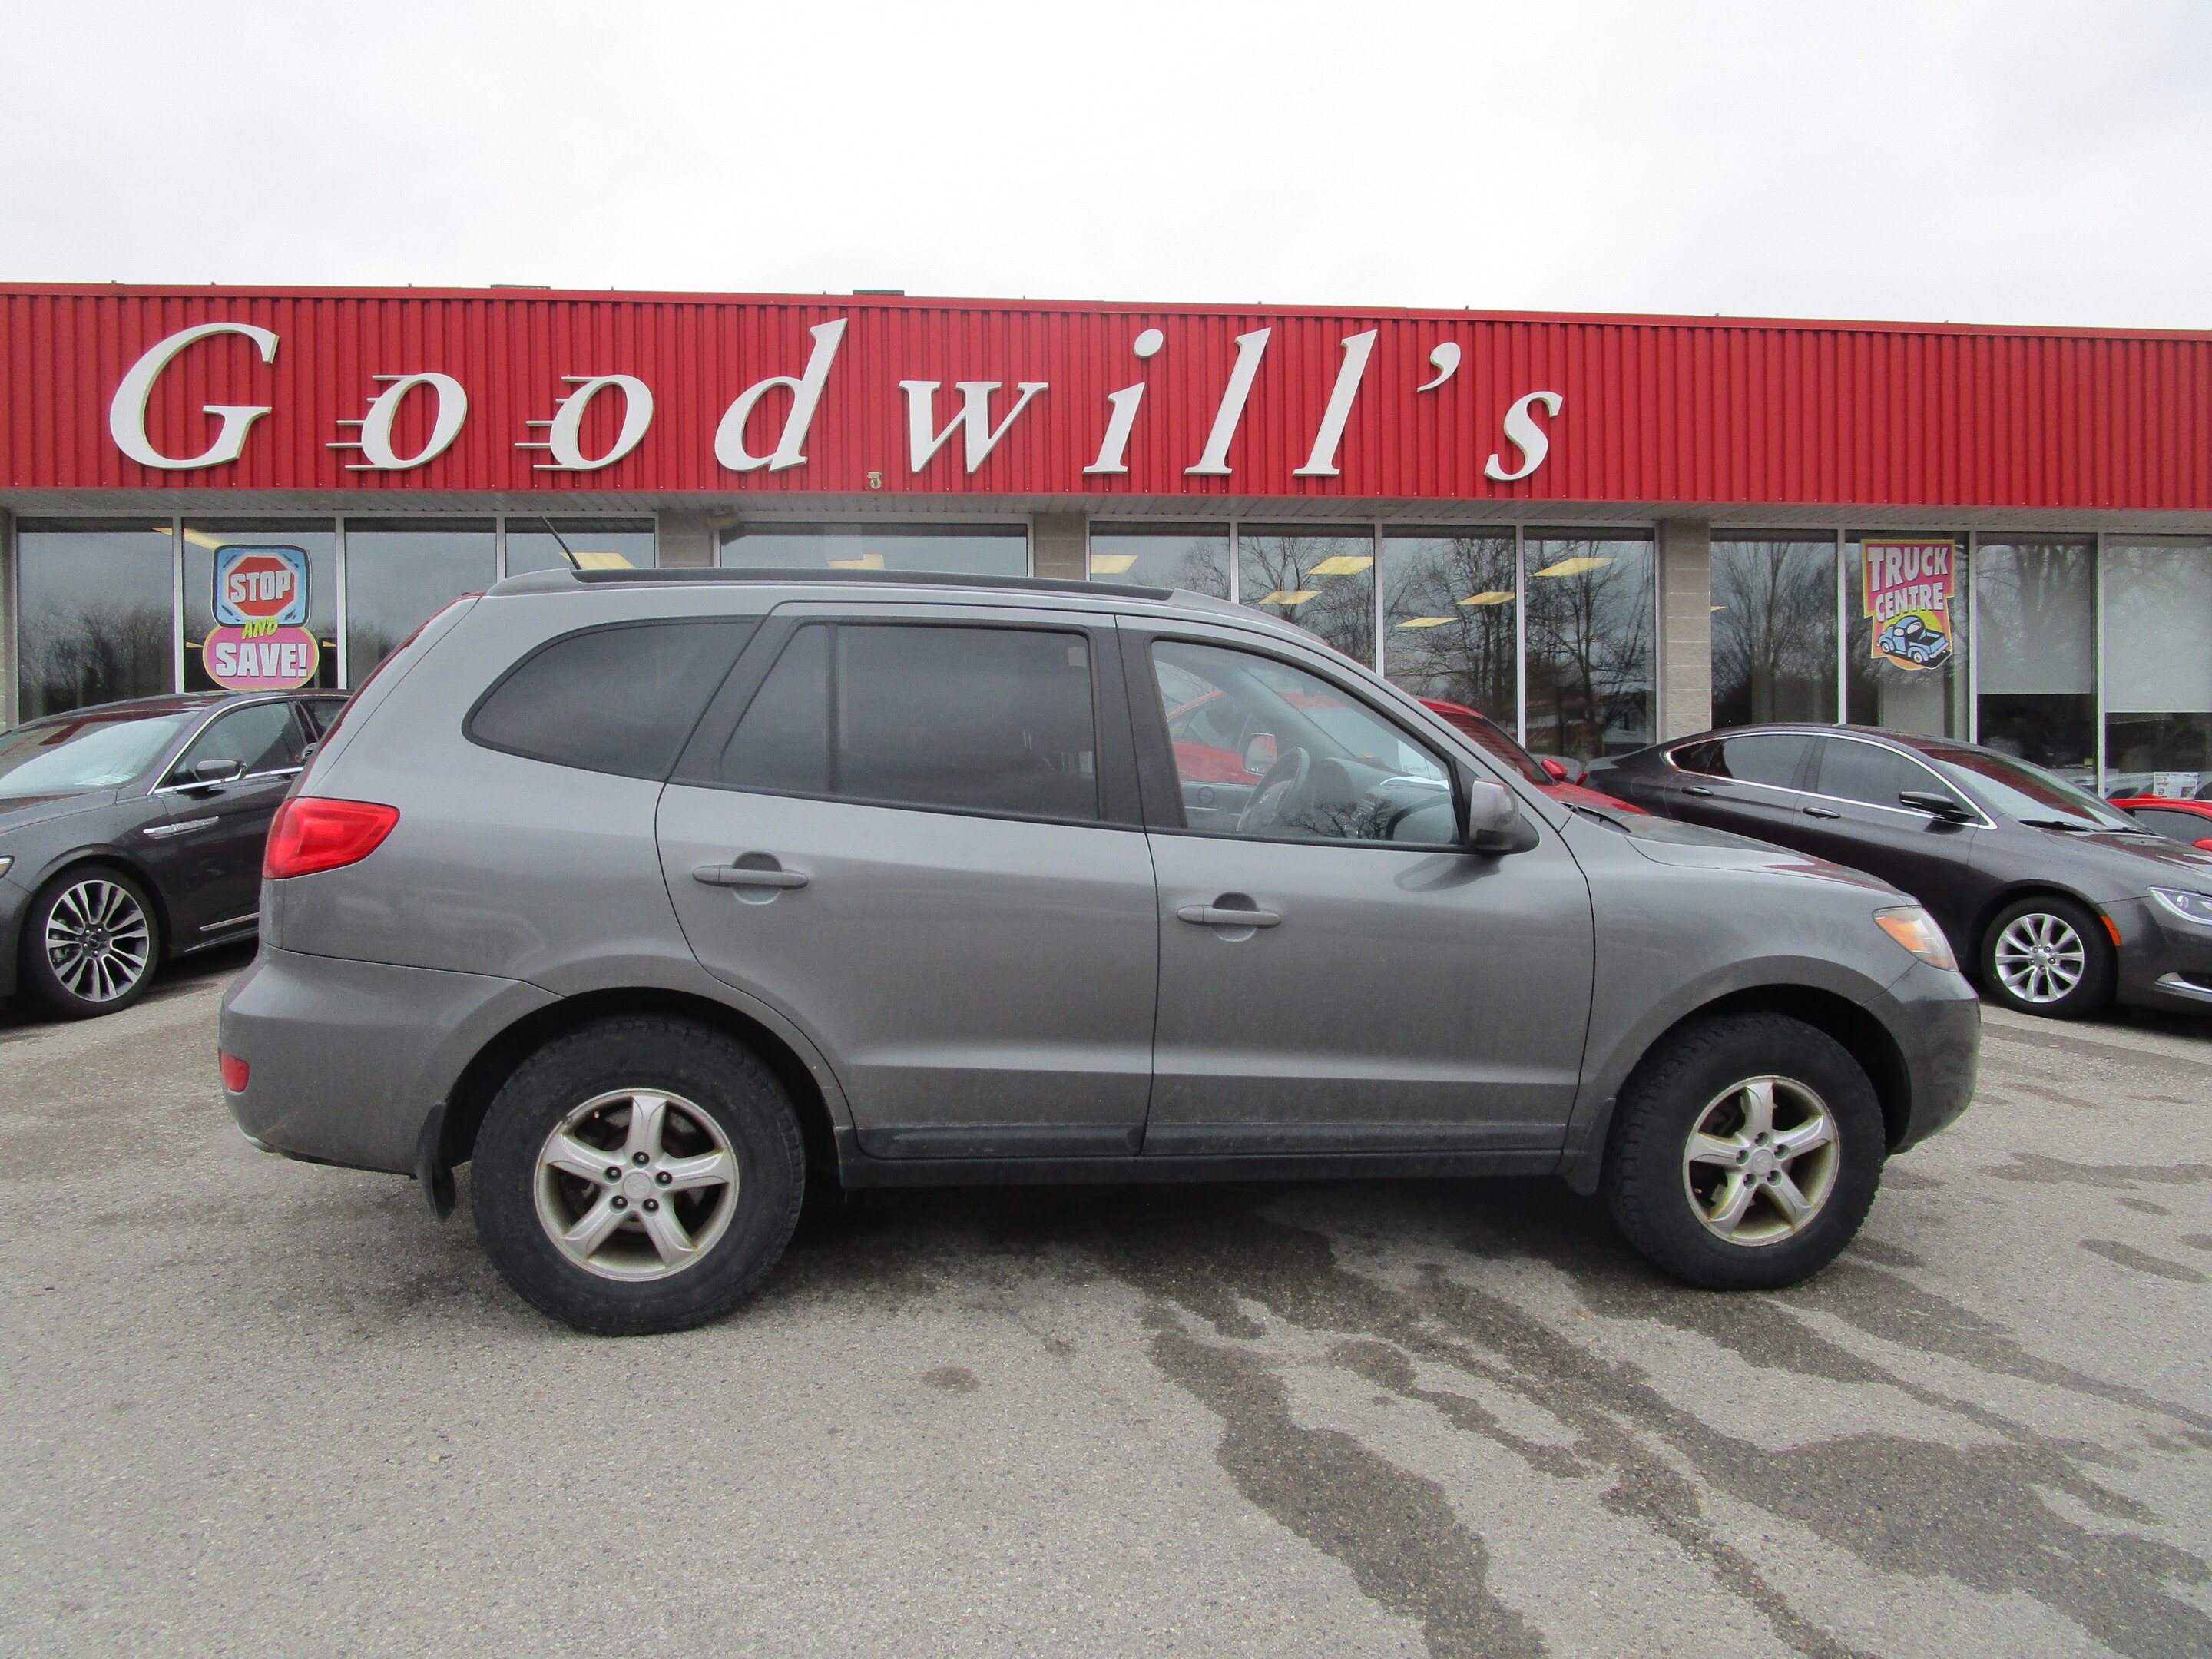 2009 Hyundai Santa Fe LOCAL TRADE, SOLD AS IS, NOT INSPECTED FOR SAFETY!